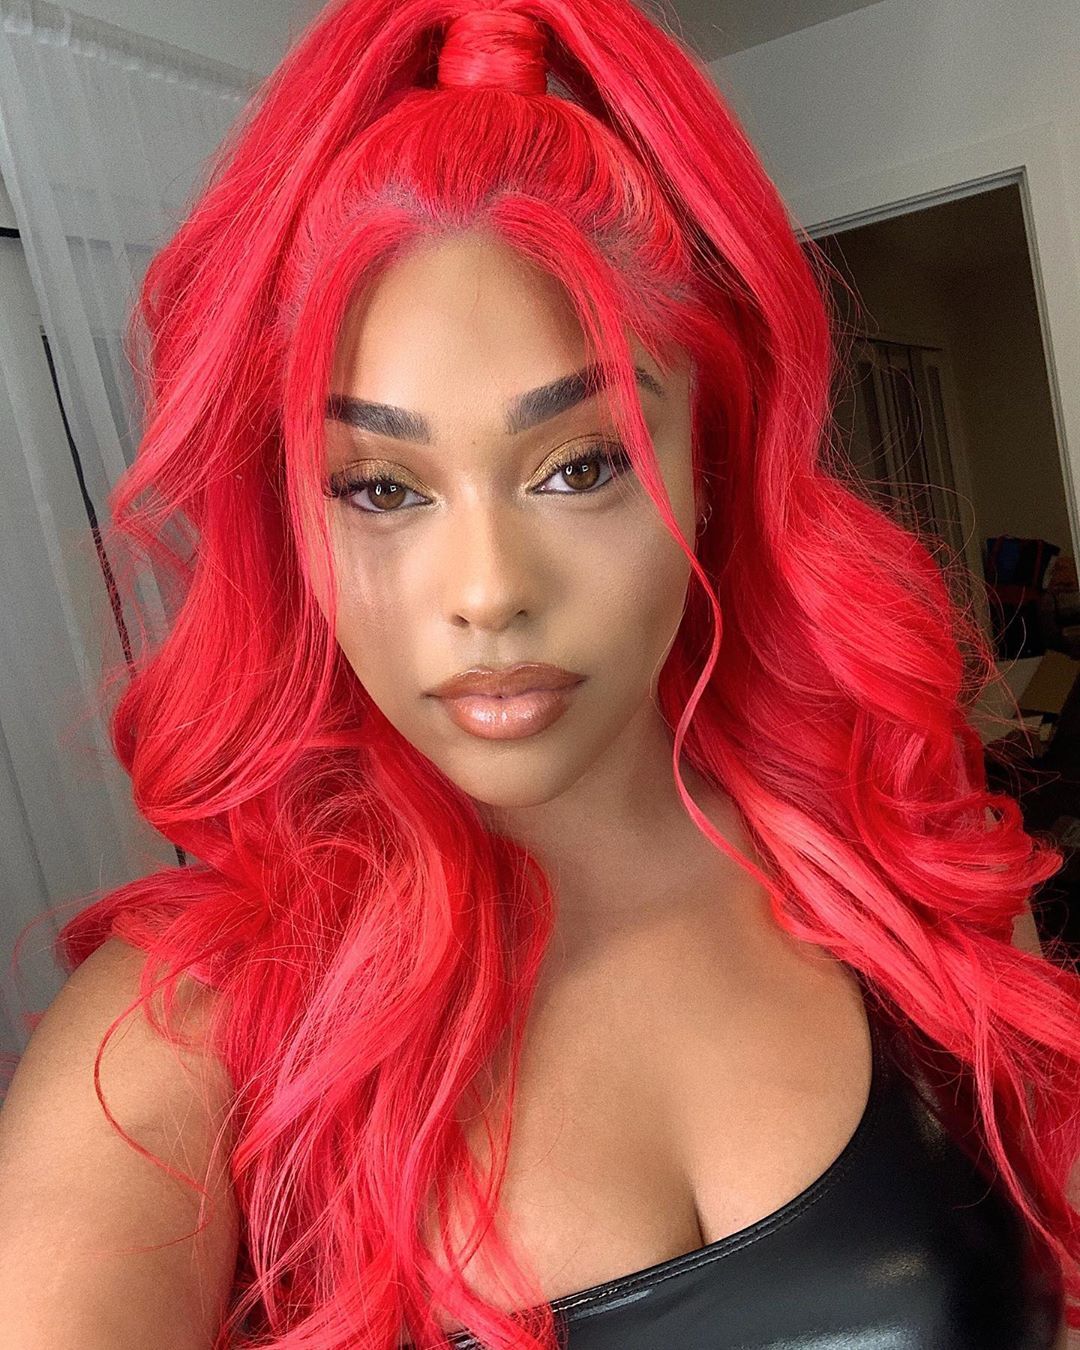 Jordyn Woods Has Fire-Engine Red Hair Now and Posted It on Instagram